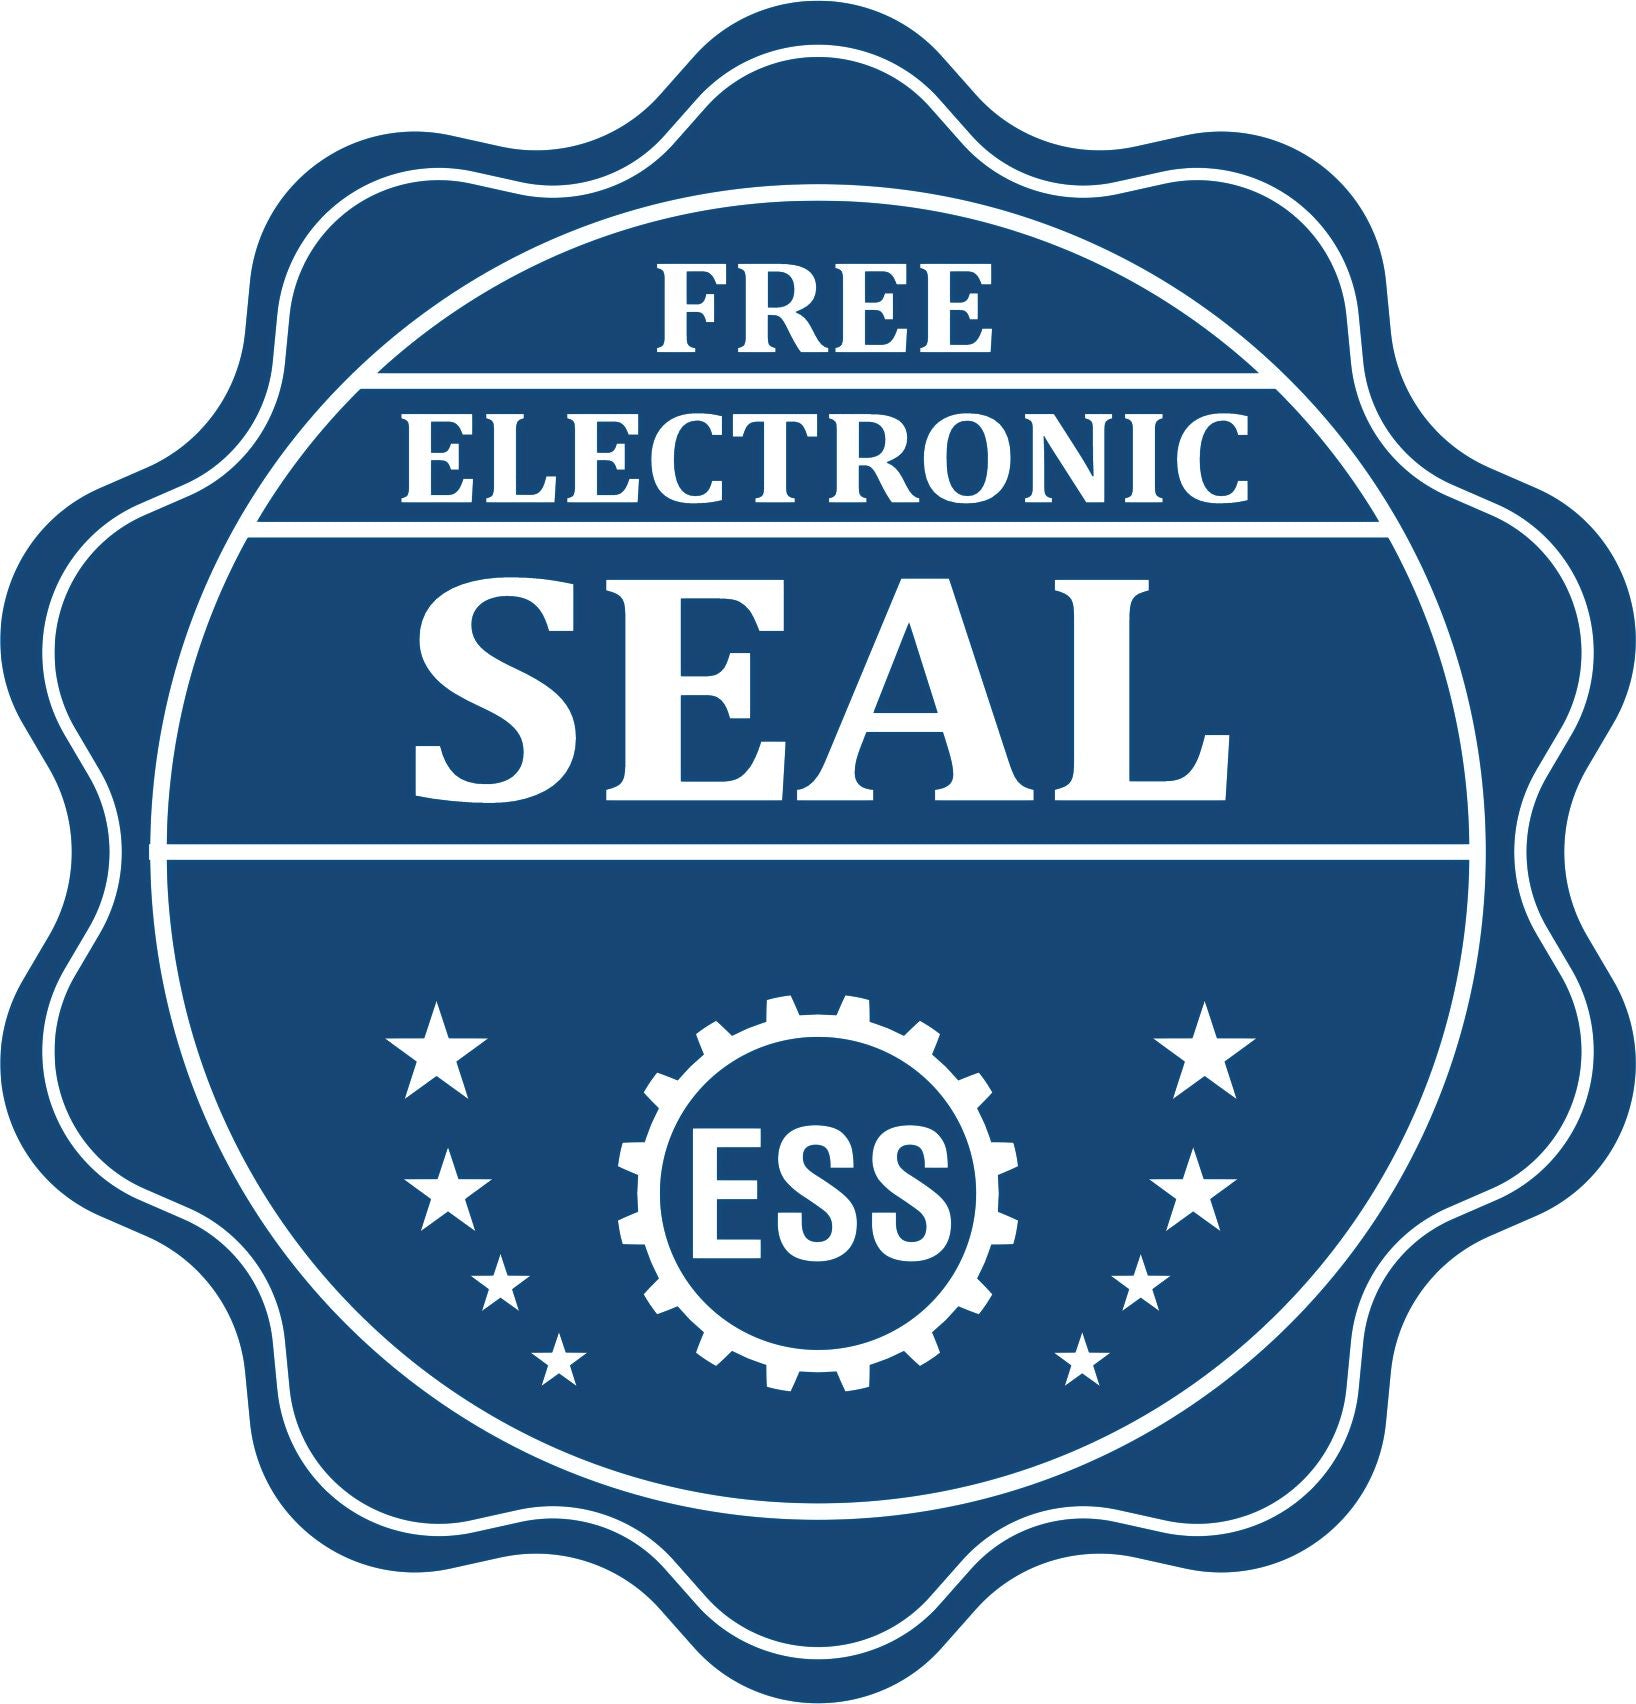 A badge showing a free electronic seal for the Gift Virginia Landscape Architect Seal with stars and the ESS gear on the emblem.